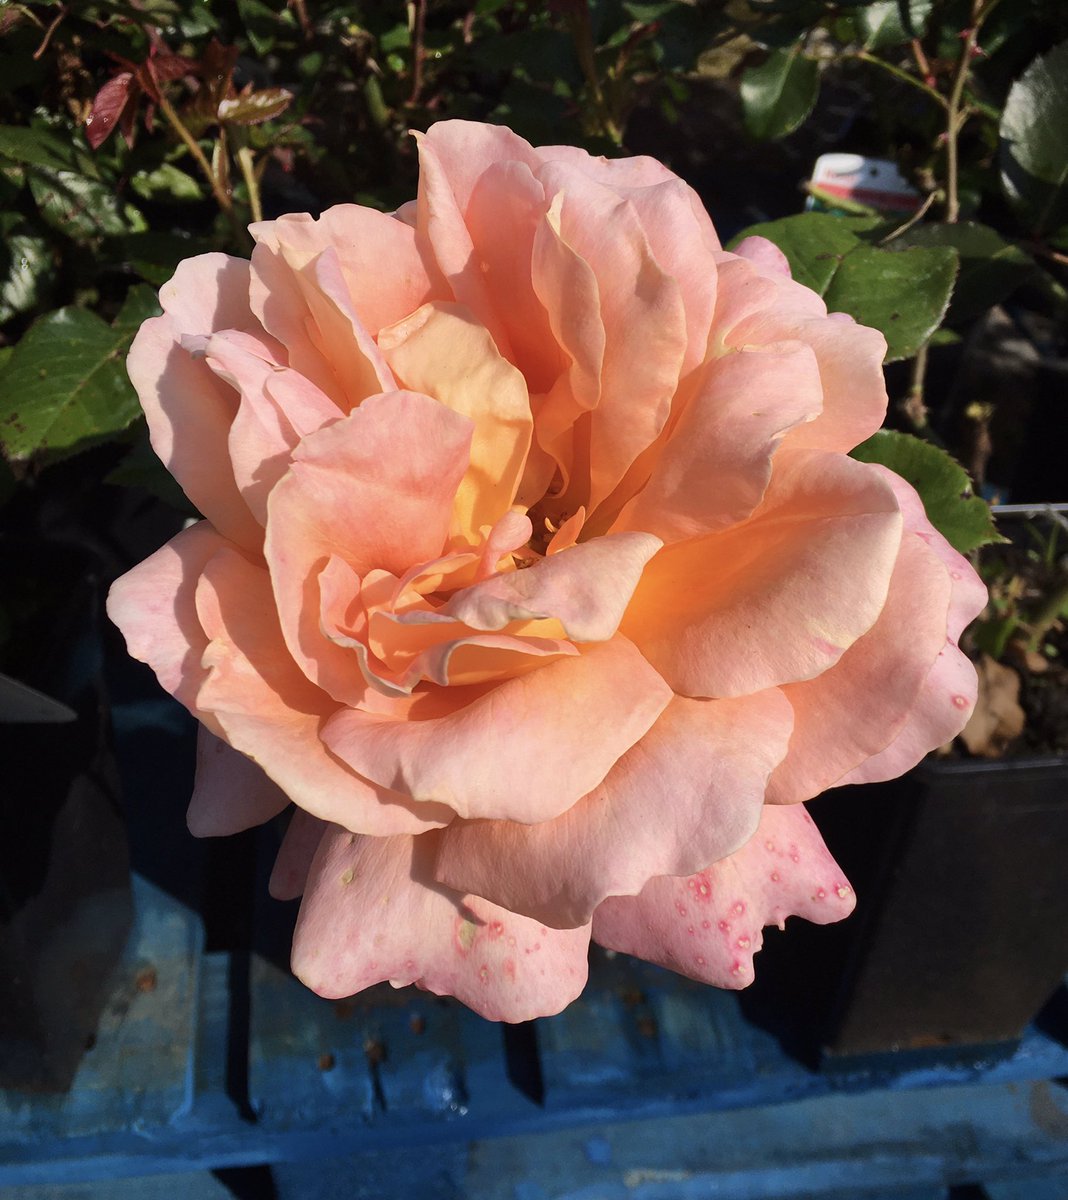 A beautiful rose with a lovely scent enjoying last weekends sunshine. It’s a very wet morning but have a great Wednesday. #RoseWednesday #Roses #GardeningX